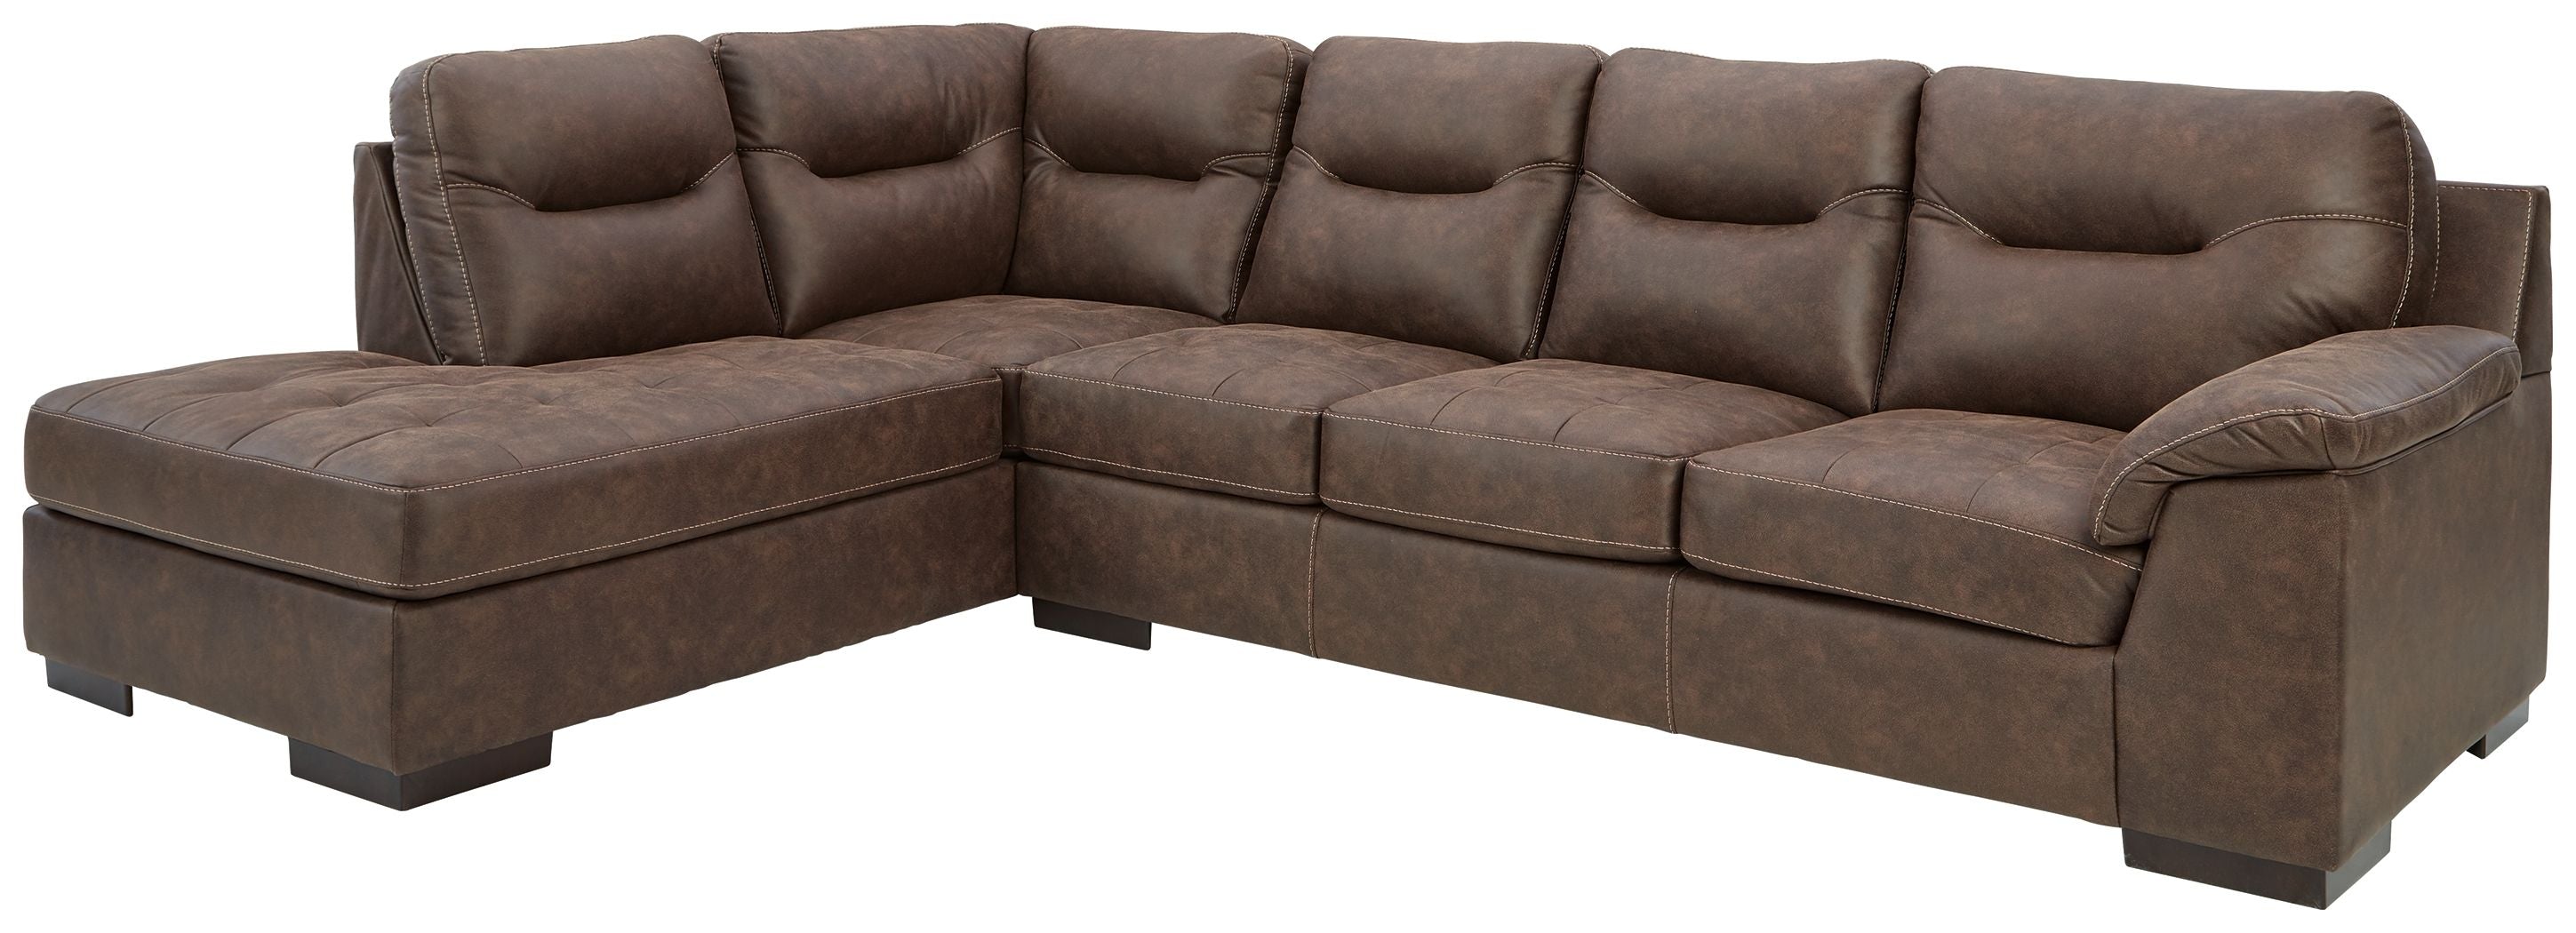 Maderla Faux Leather Sectional Sofa